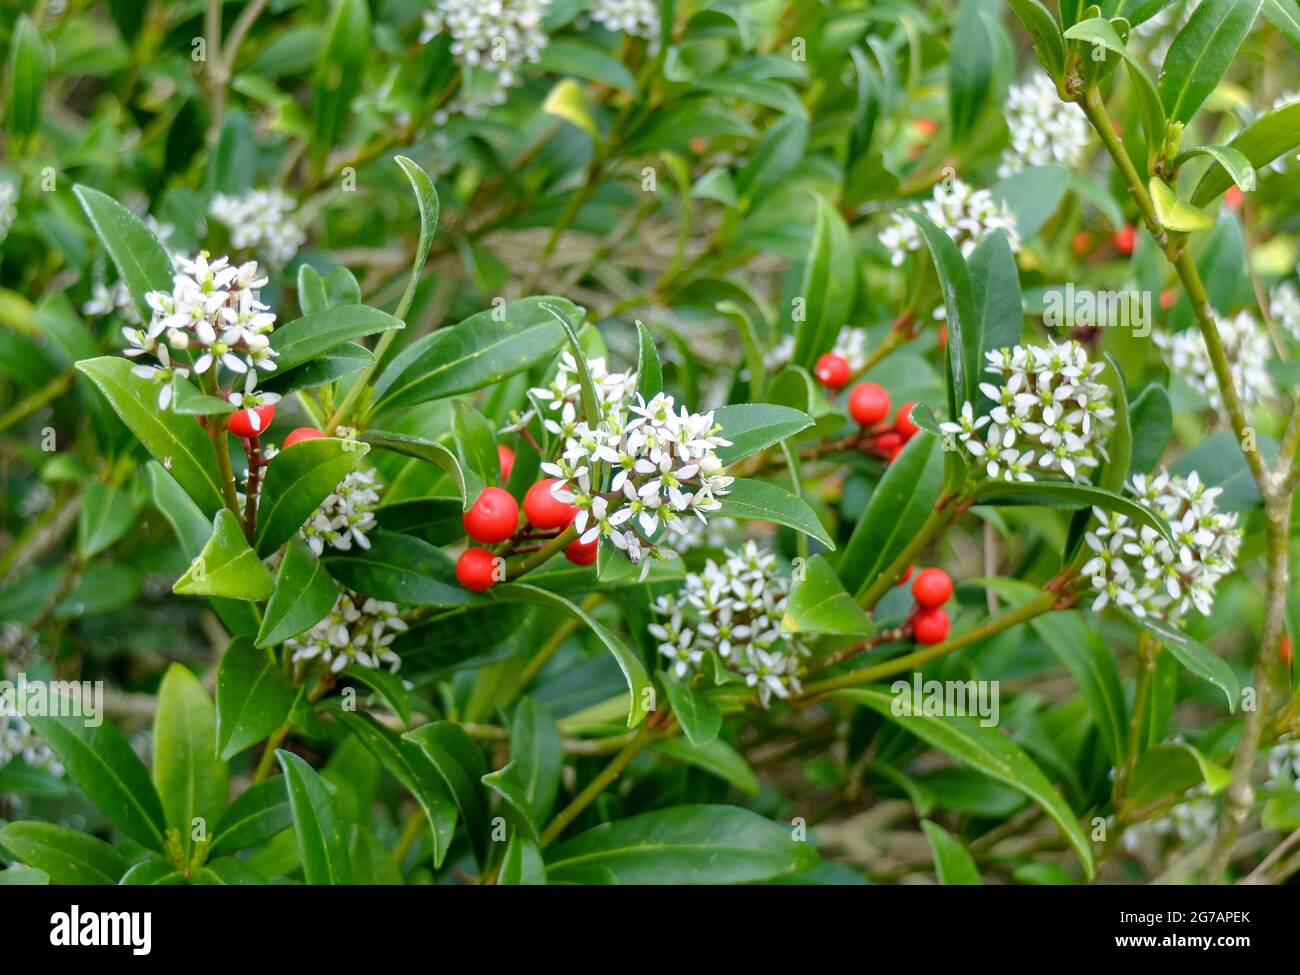 The Japanese fruit skimmia (Skimmia japonica) with fruits and flowers Stock Photo